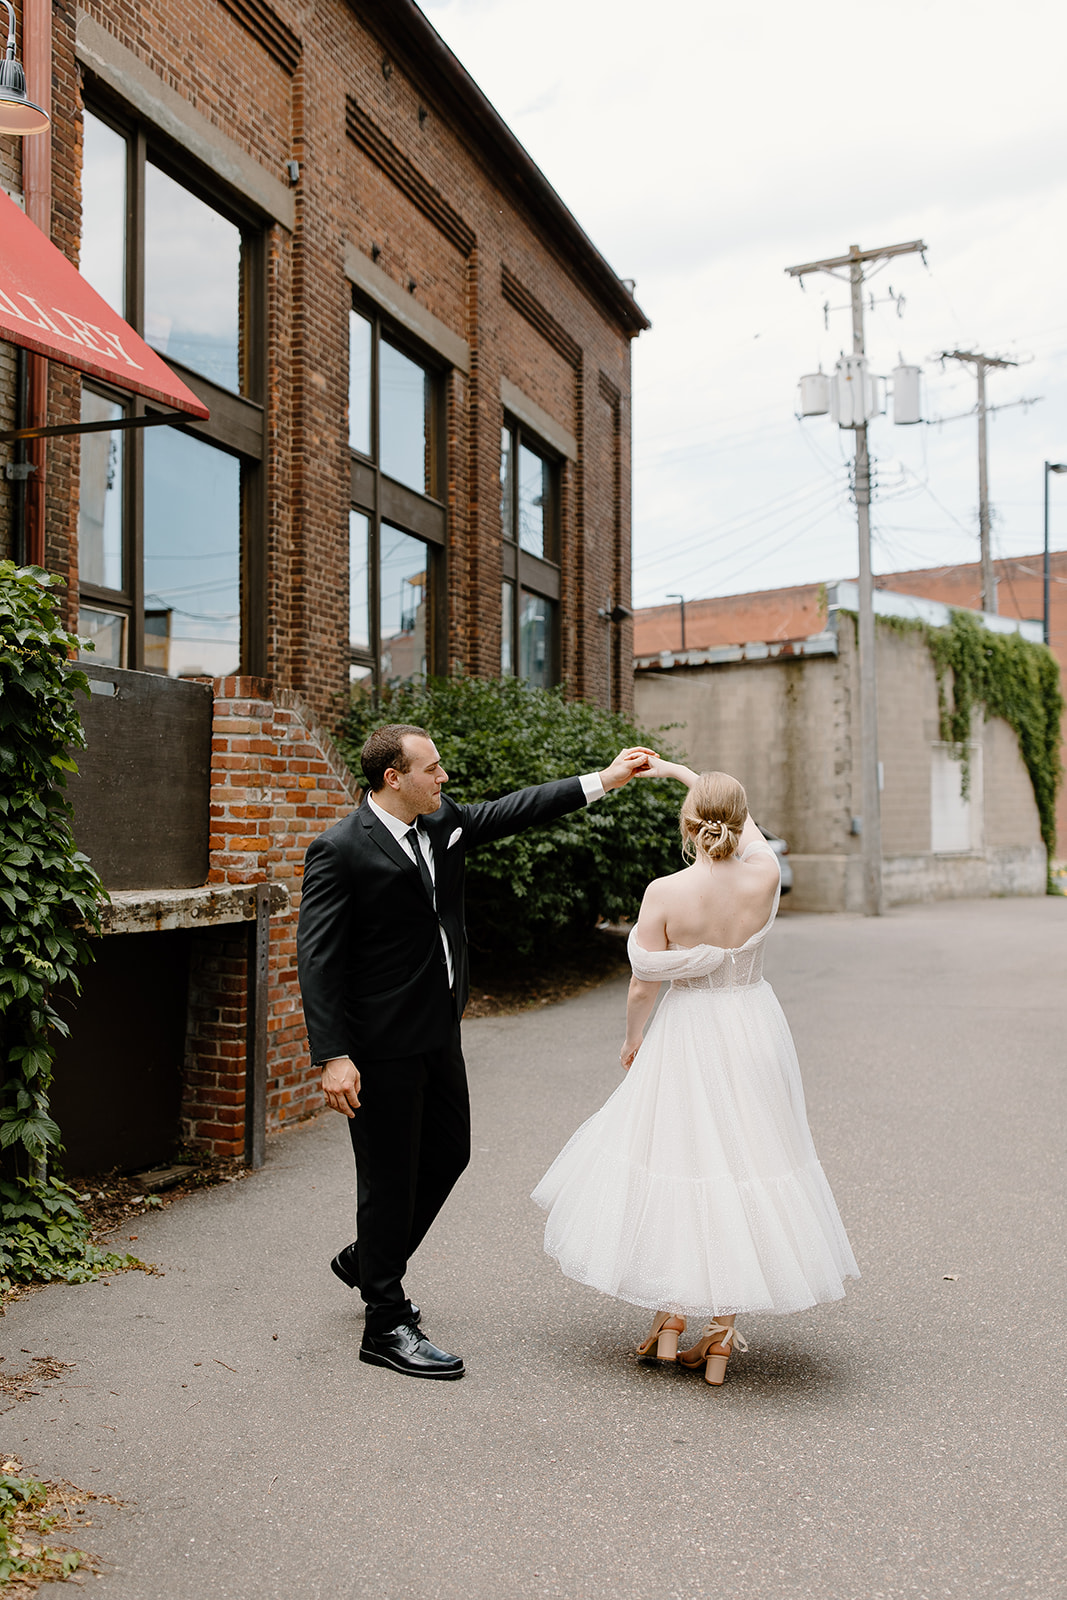 Groom twirls his bride in an alley